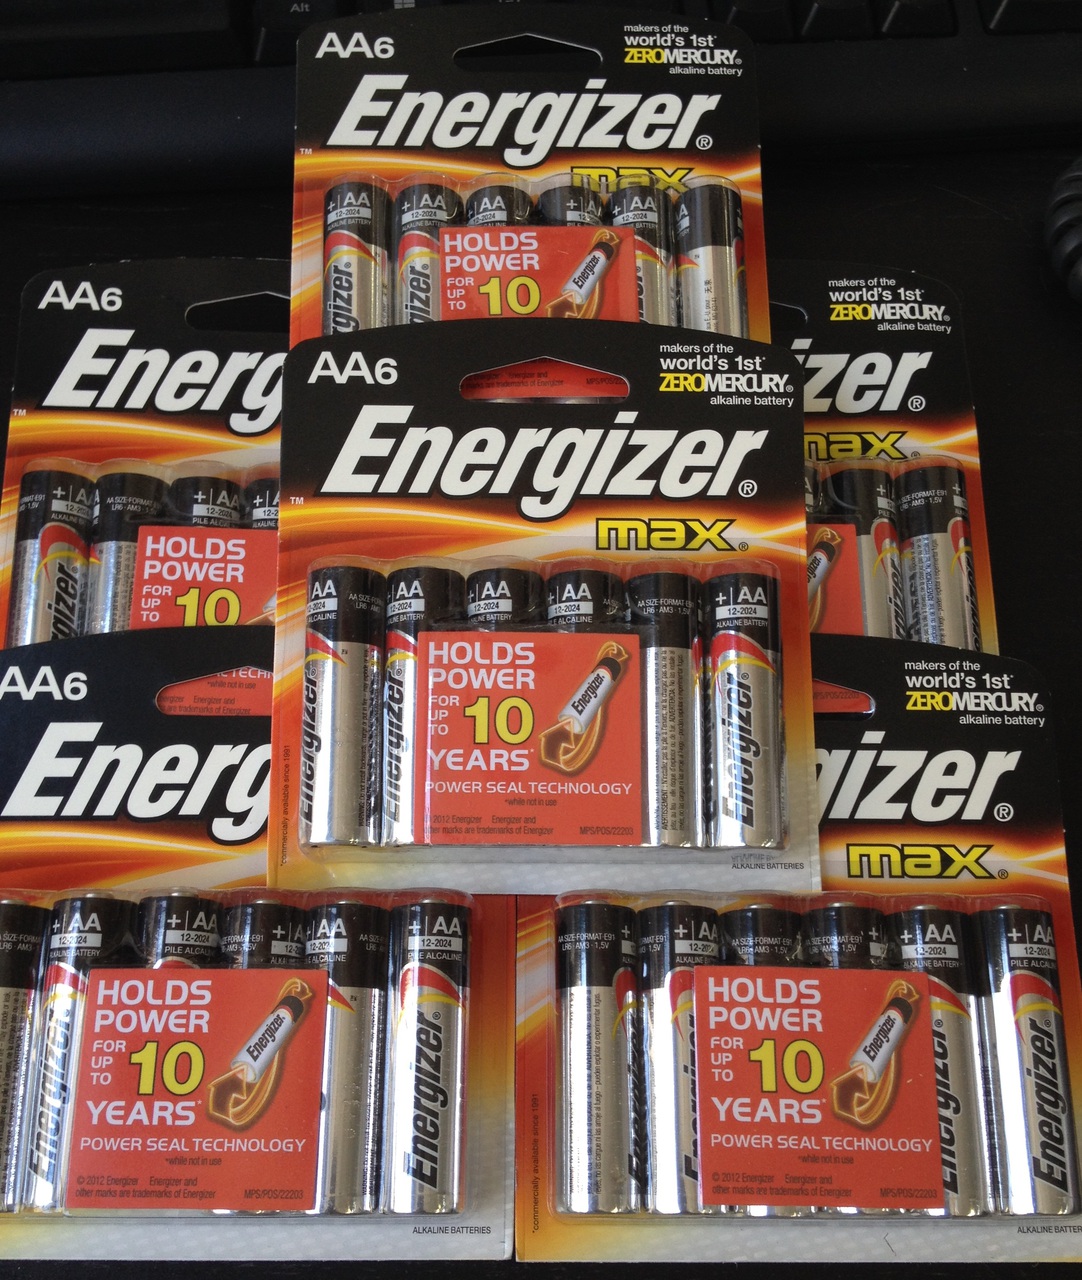 72 - Energizer MAX AA E91 1.5V Alkaline Batteries - 12 Retail Cards Of 6 + Free Shipping